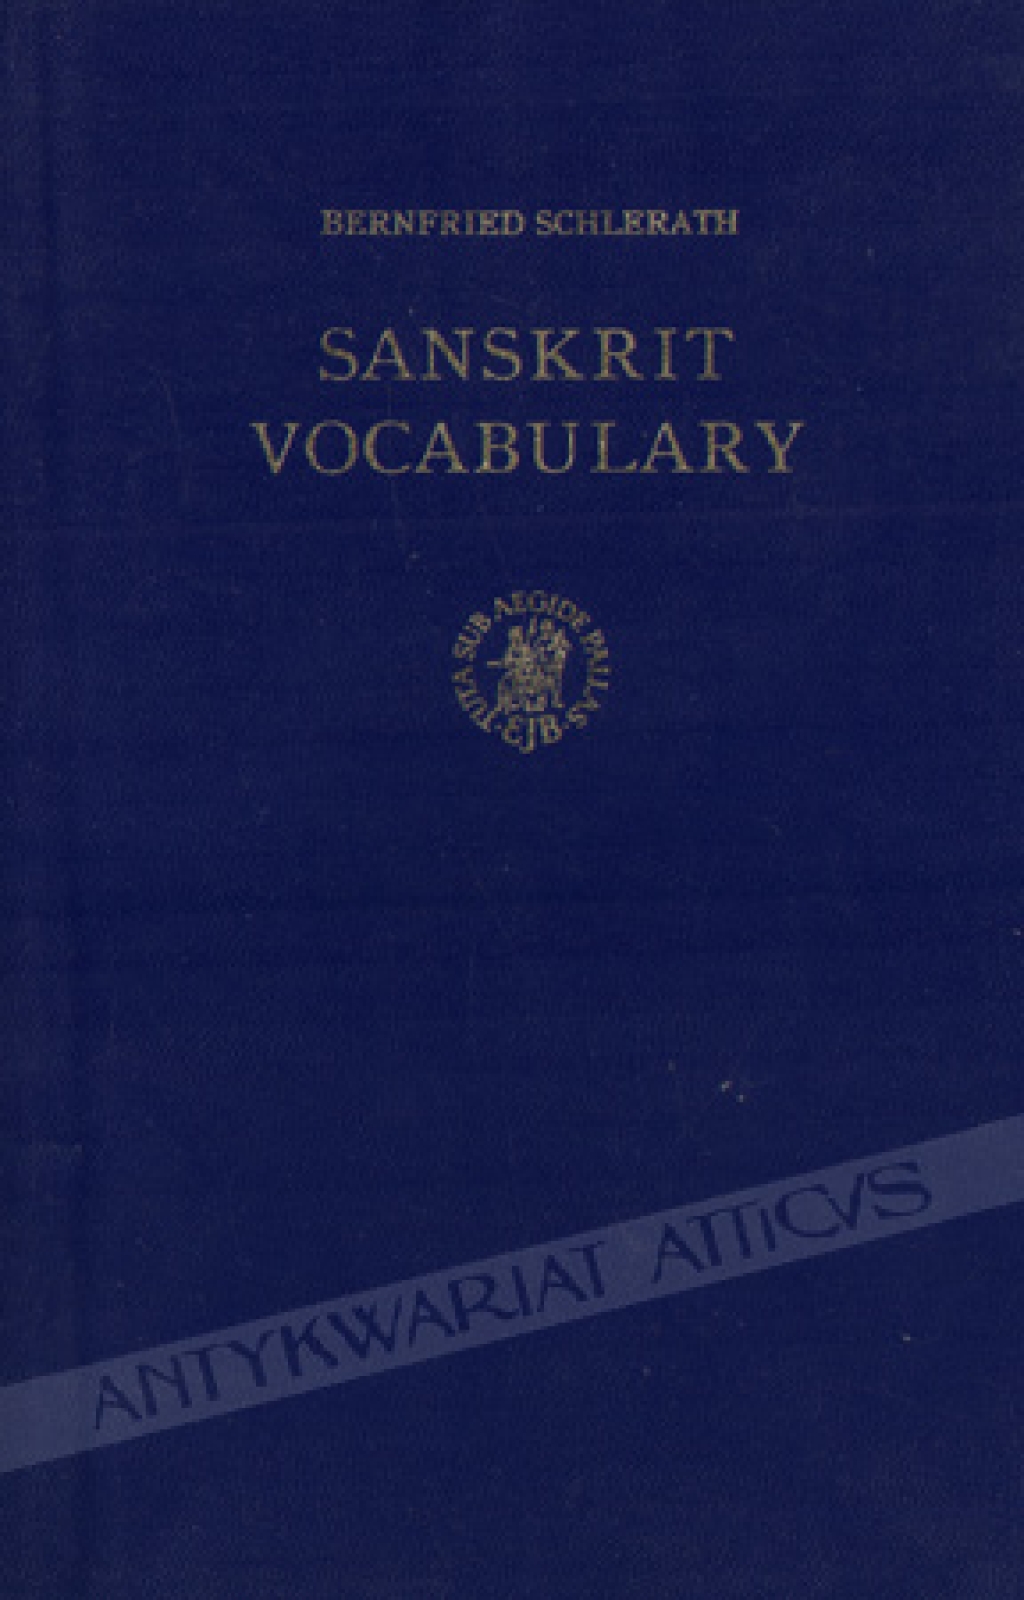 Sanskrit vocabulary. Arranged according to word families with meanings in english, german and spanish.